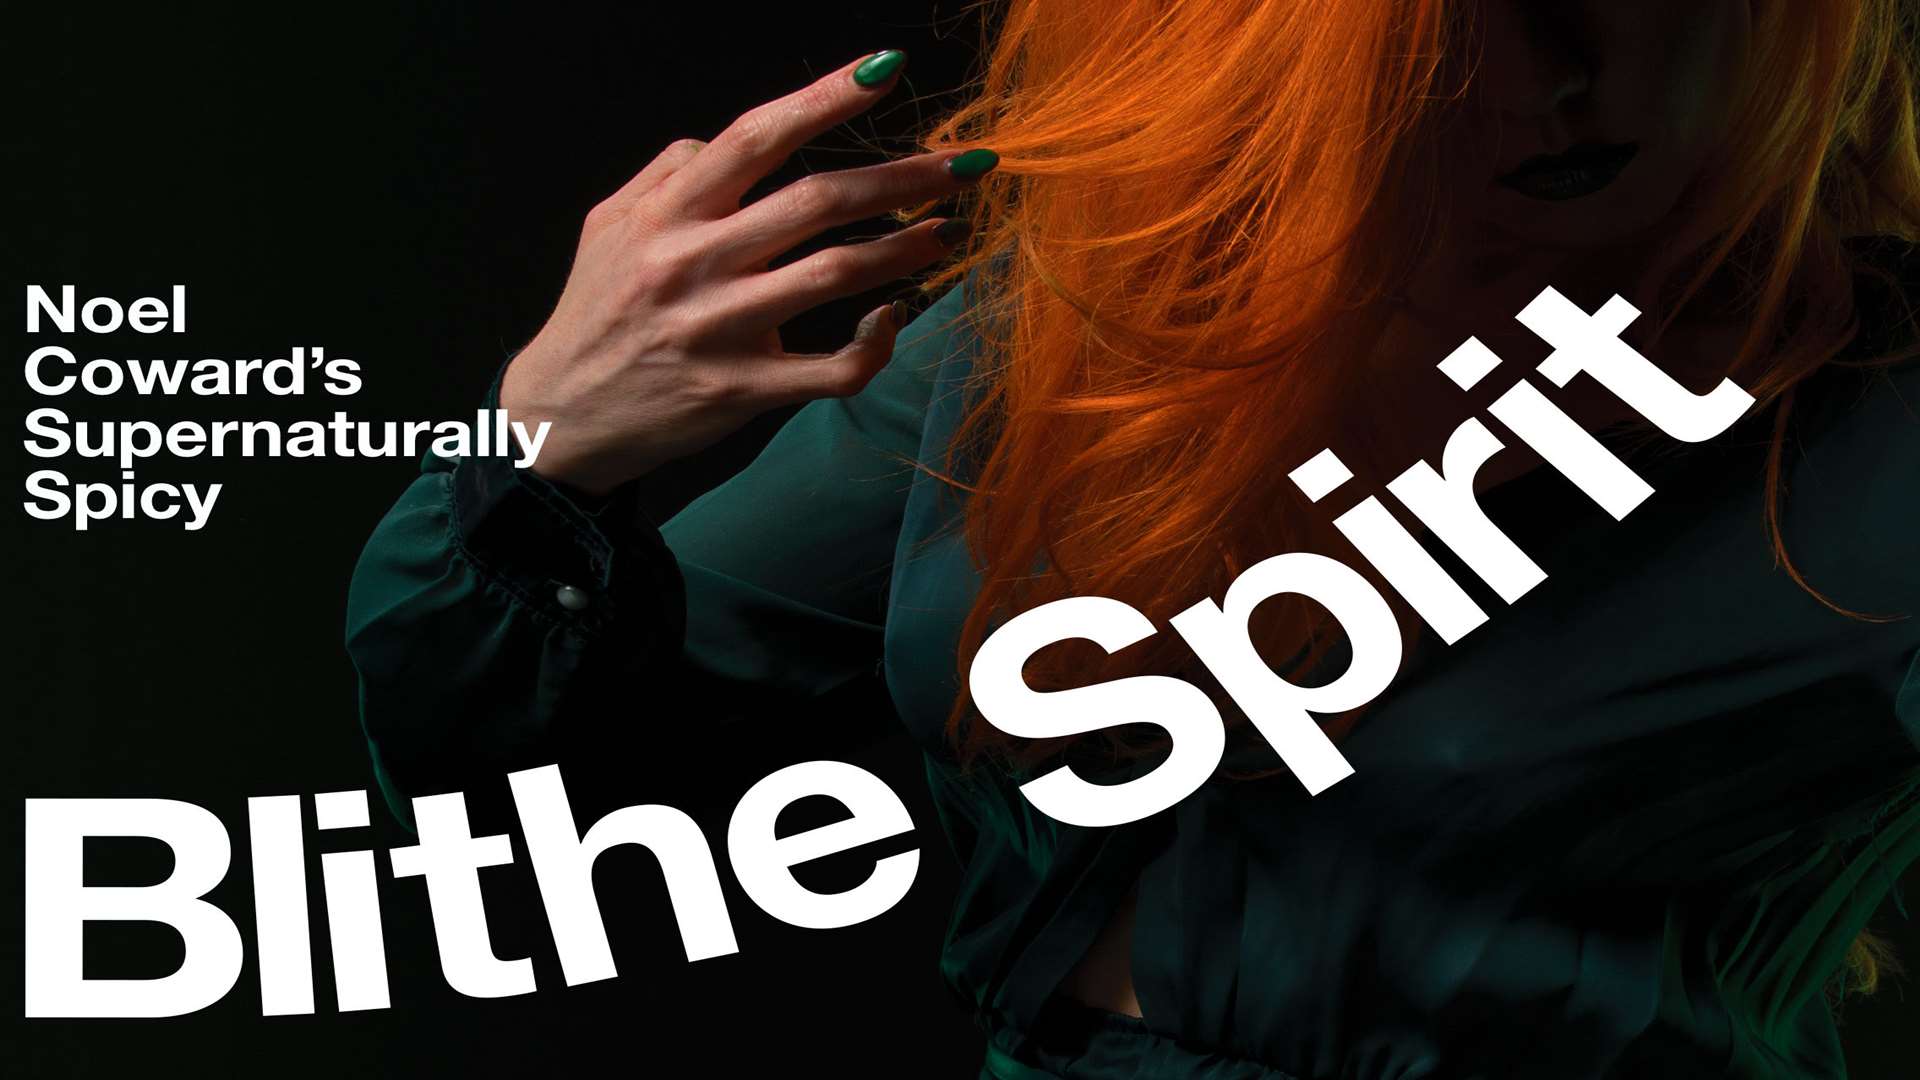 The Changeling Theatre will perform Noel Coward's Blithe Spirit in the summer